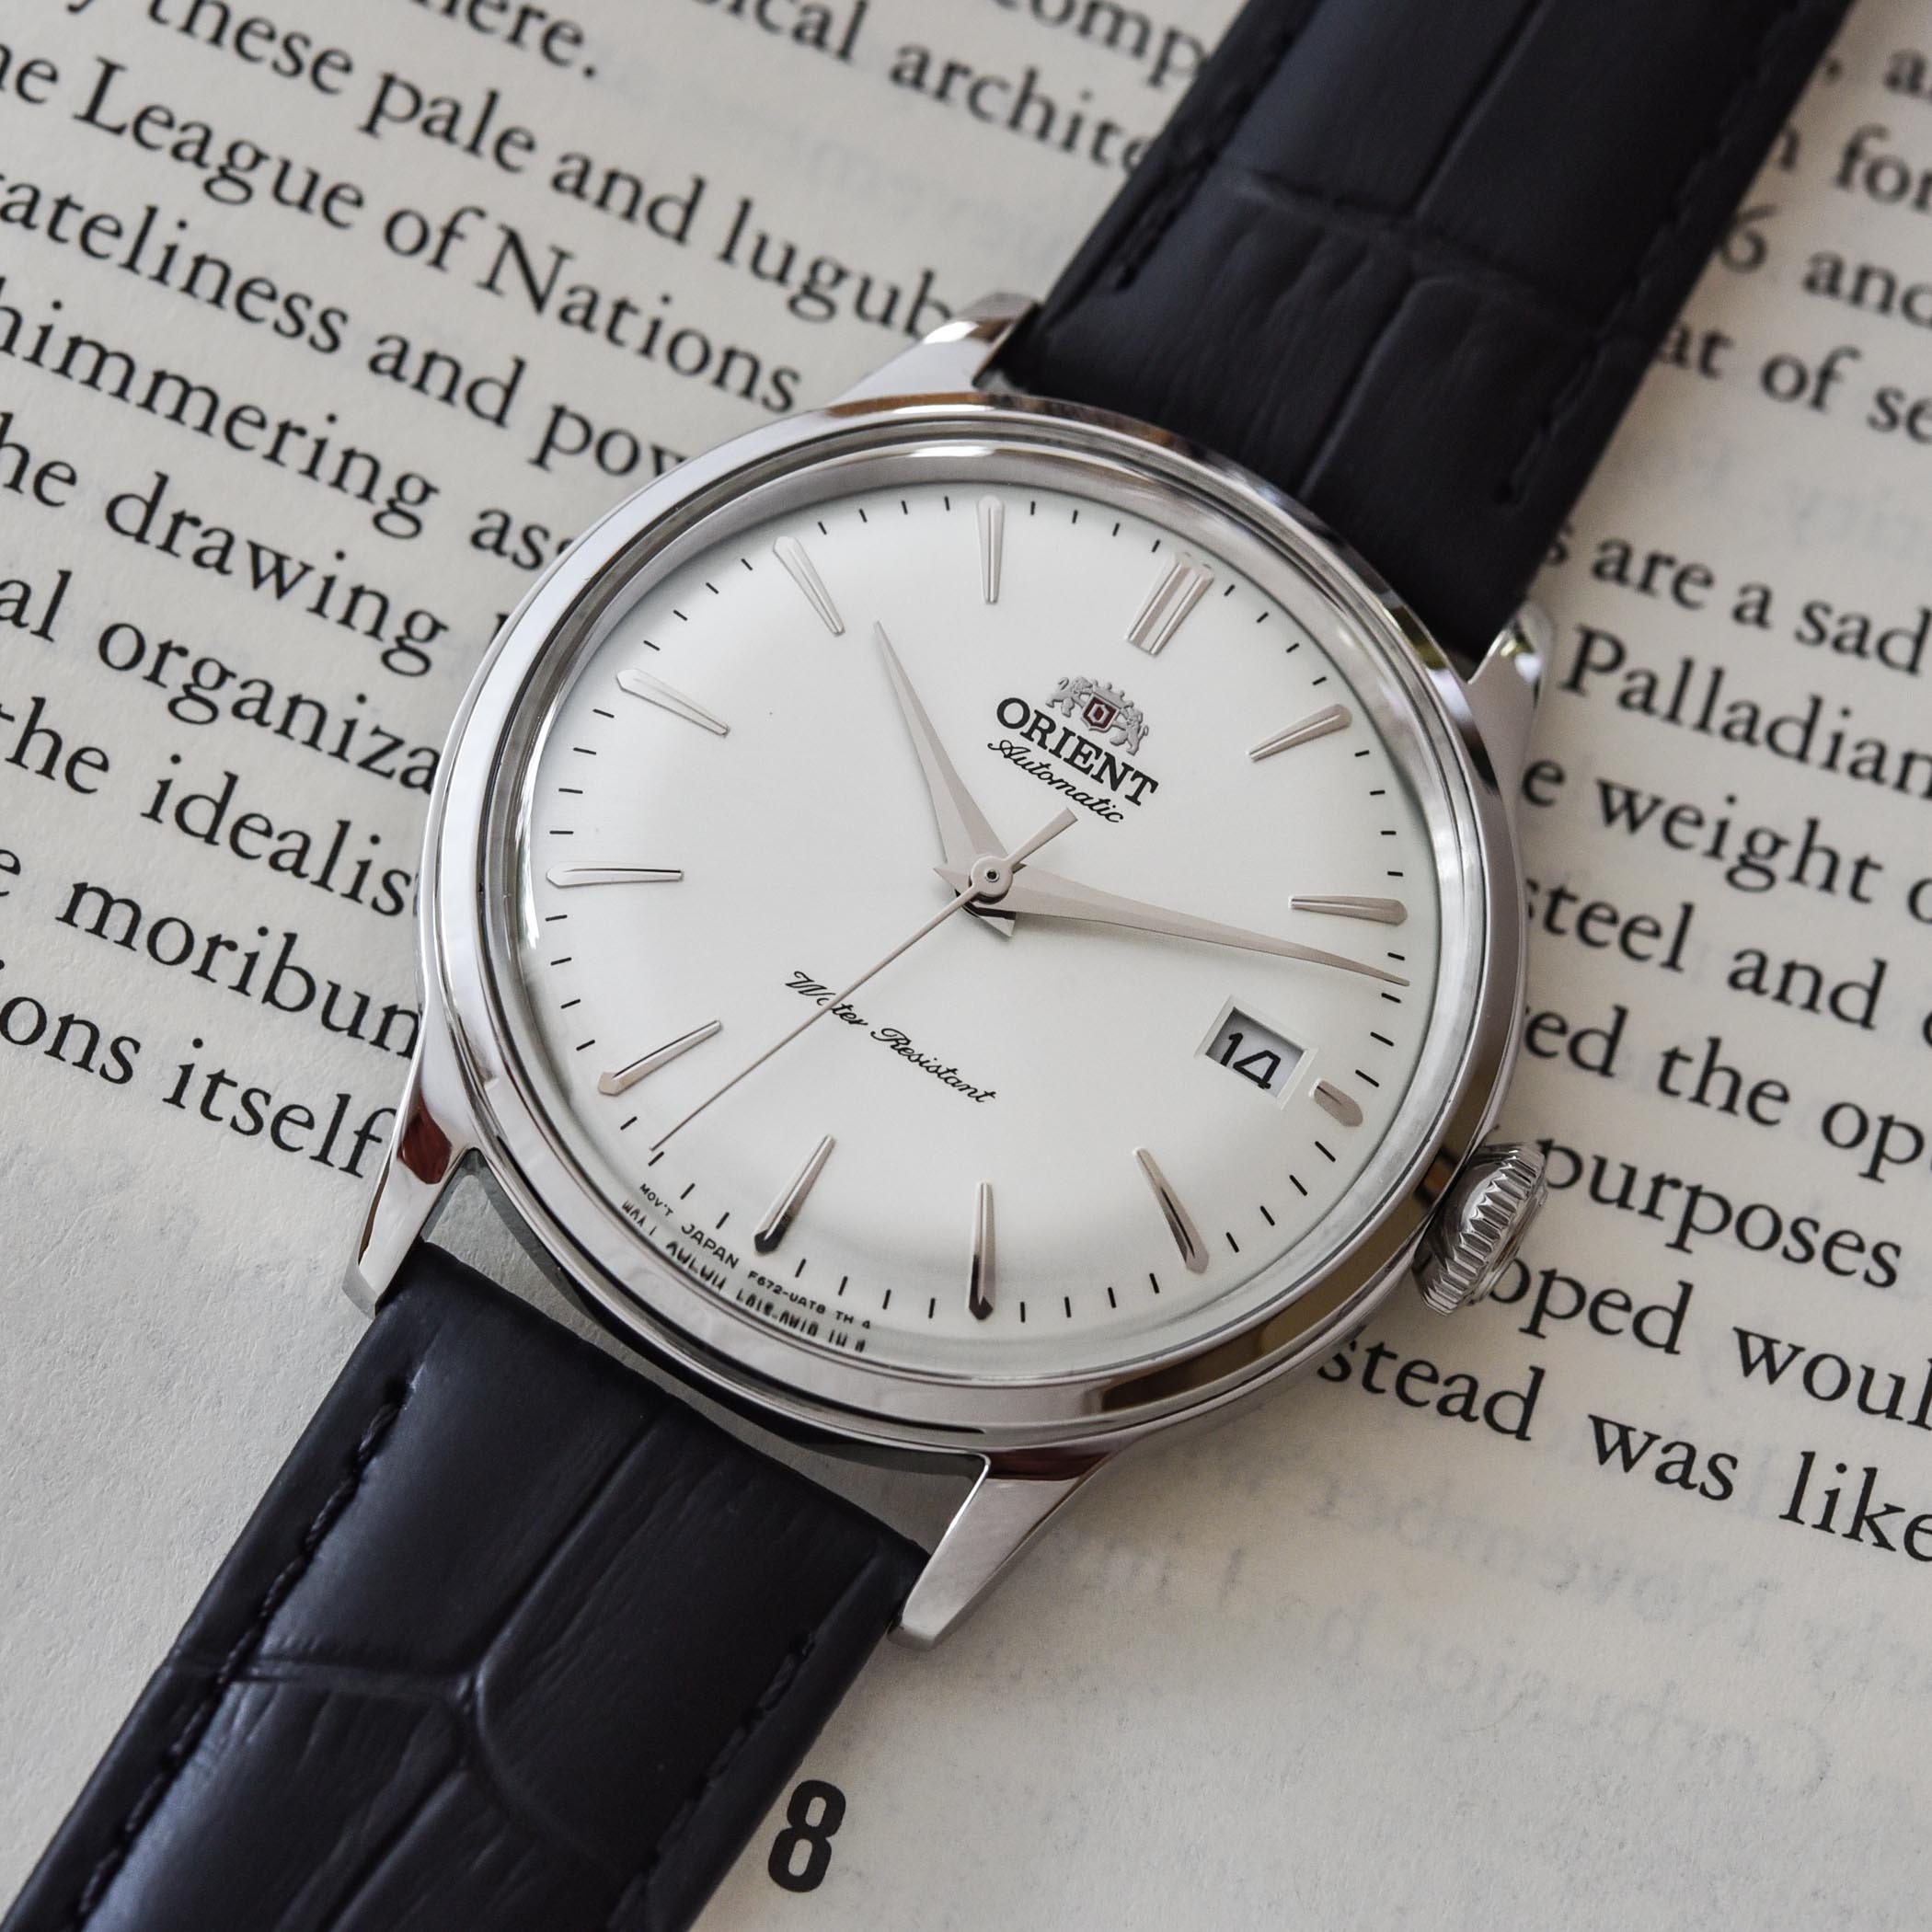 Orient Bambino 38 - Value Proposition Review